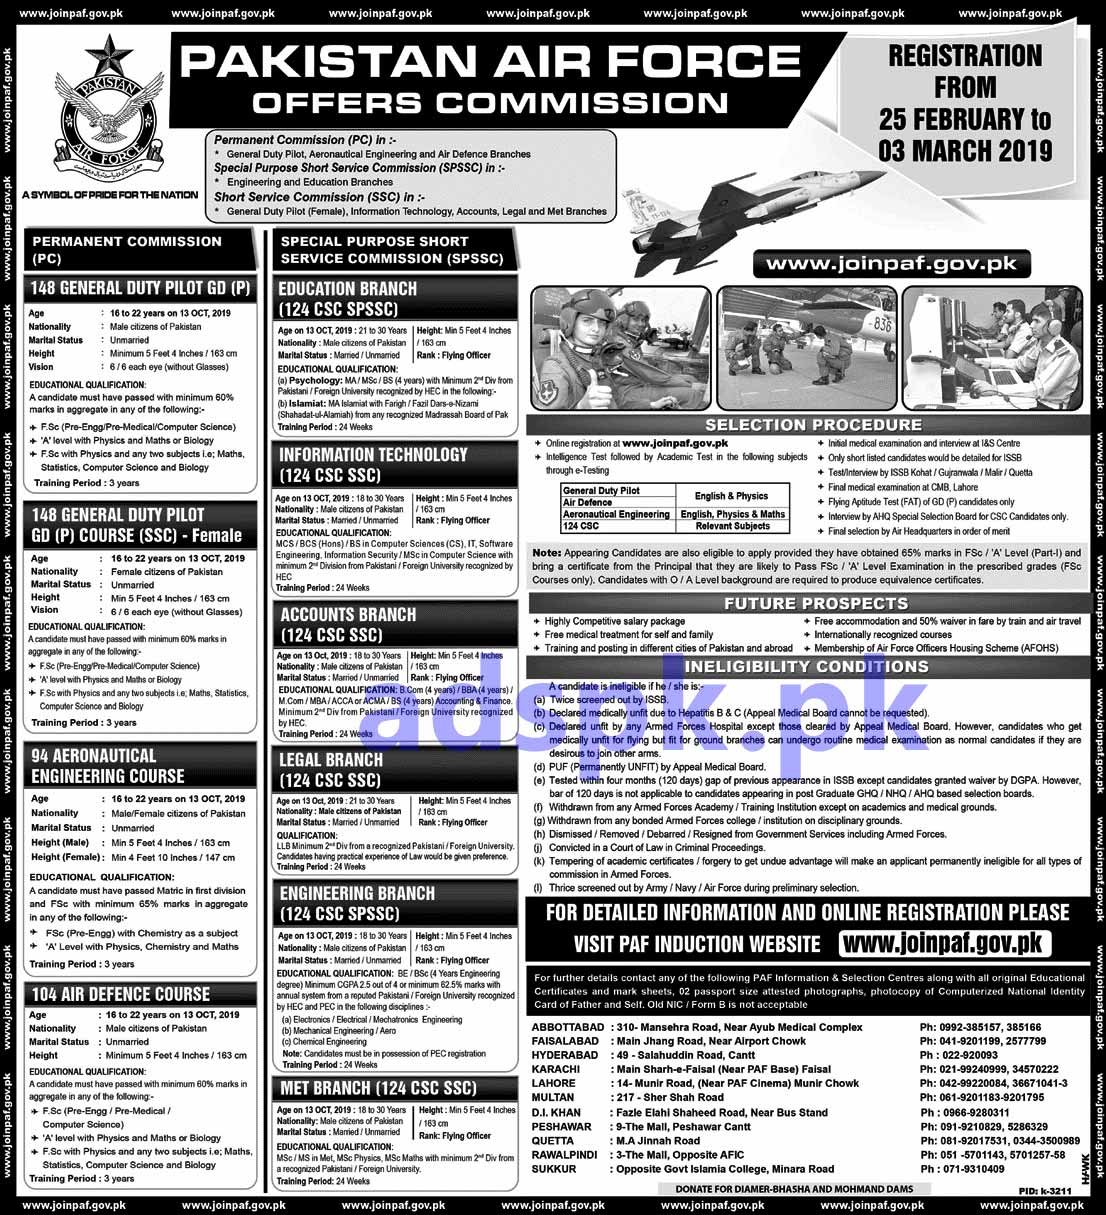 Join Pakistan Air Force 2019 for Permanent Commission 148 GDP Engineering Course 94 Aeronautical Special Purpose Short Service Commission SPSSC Education Branch 124 CSC SPSSC 104 Air Defence Course Information Technology (124 CSC SSC) Accounts Branch Engineering Branch MET Branch Jobs Application Deadline 03-03-2019 Apply Online Now